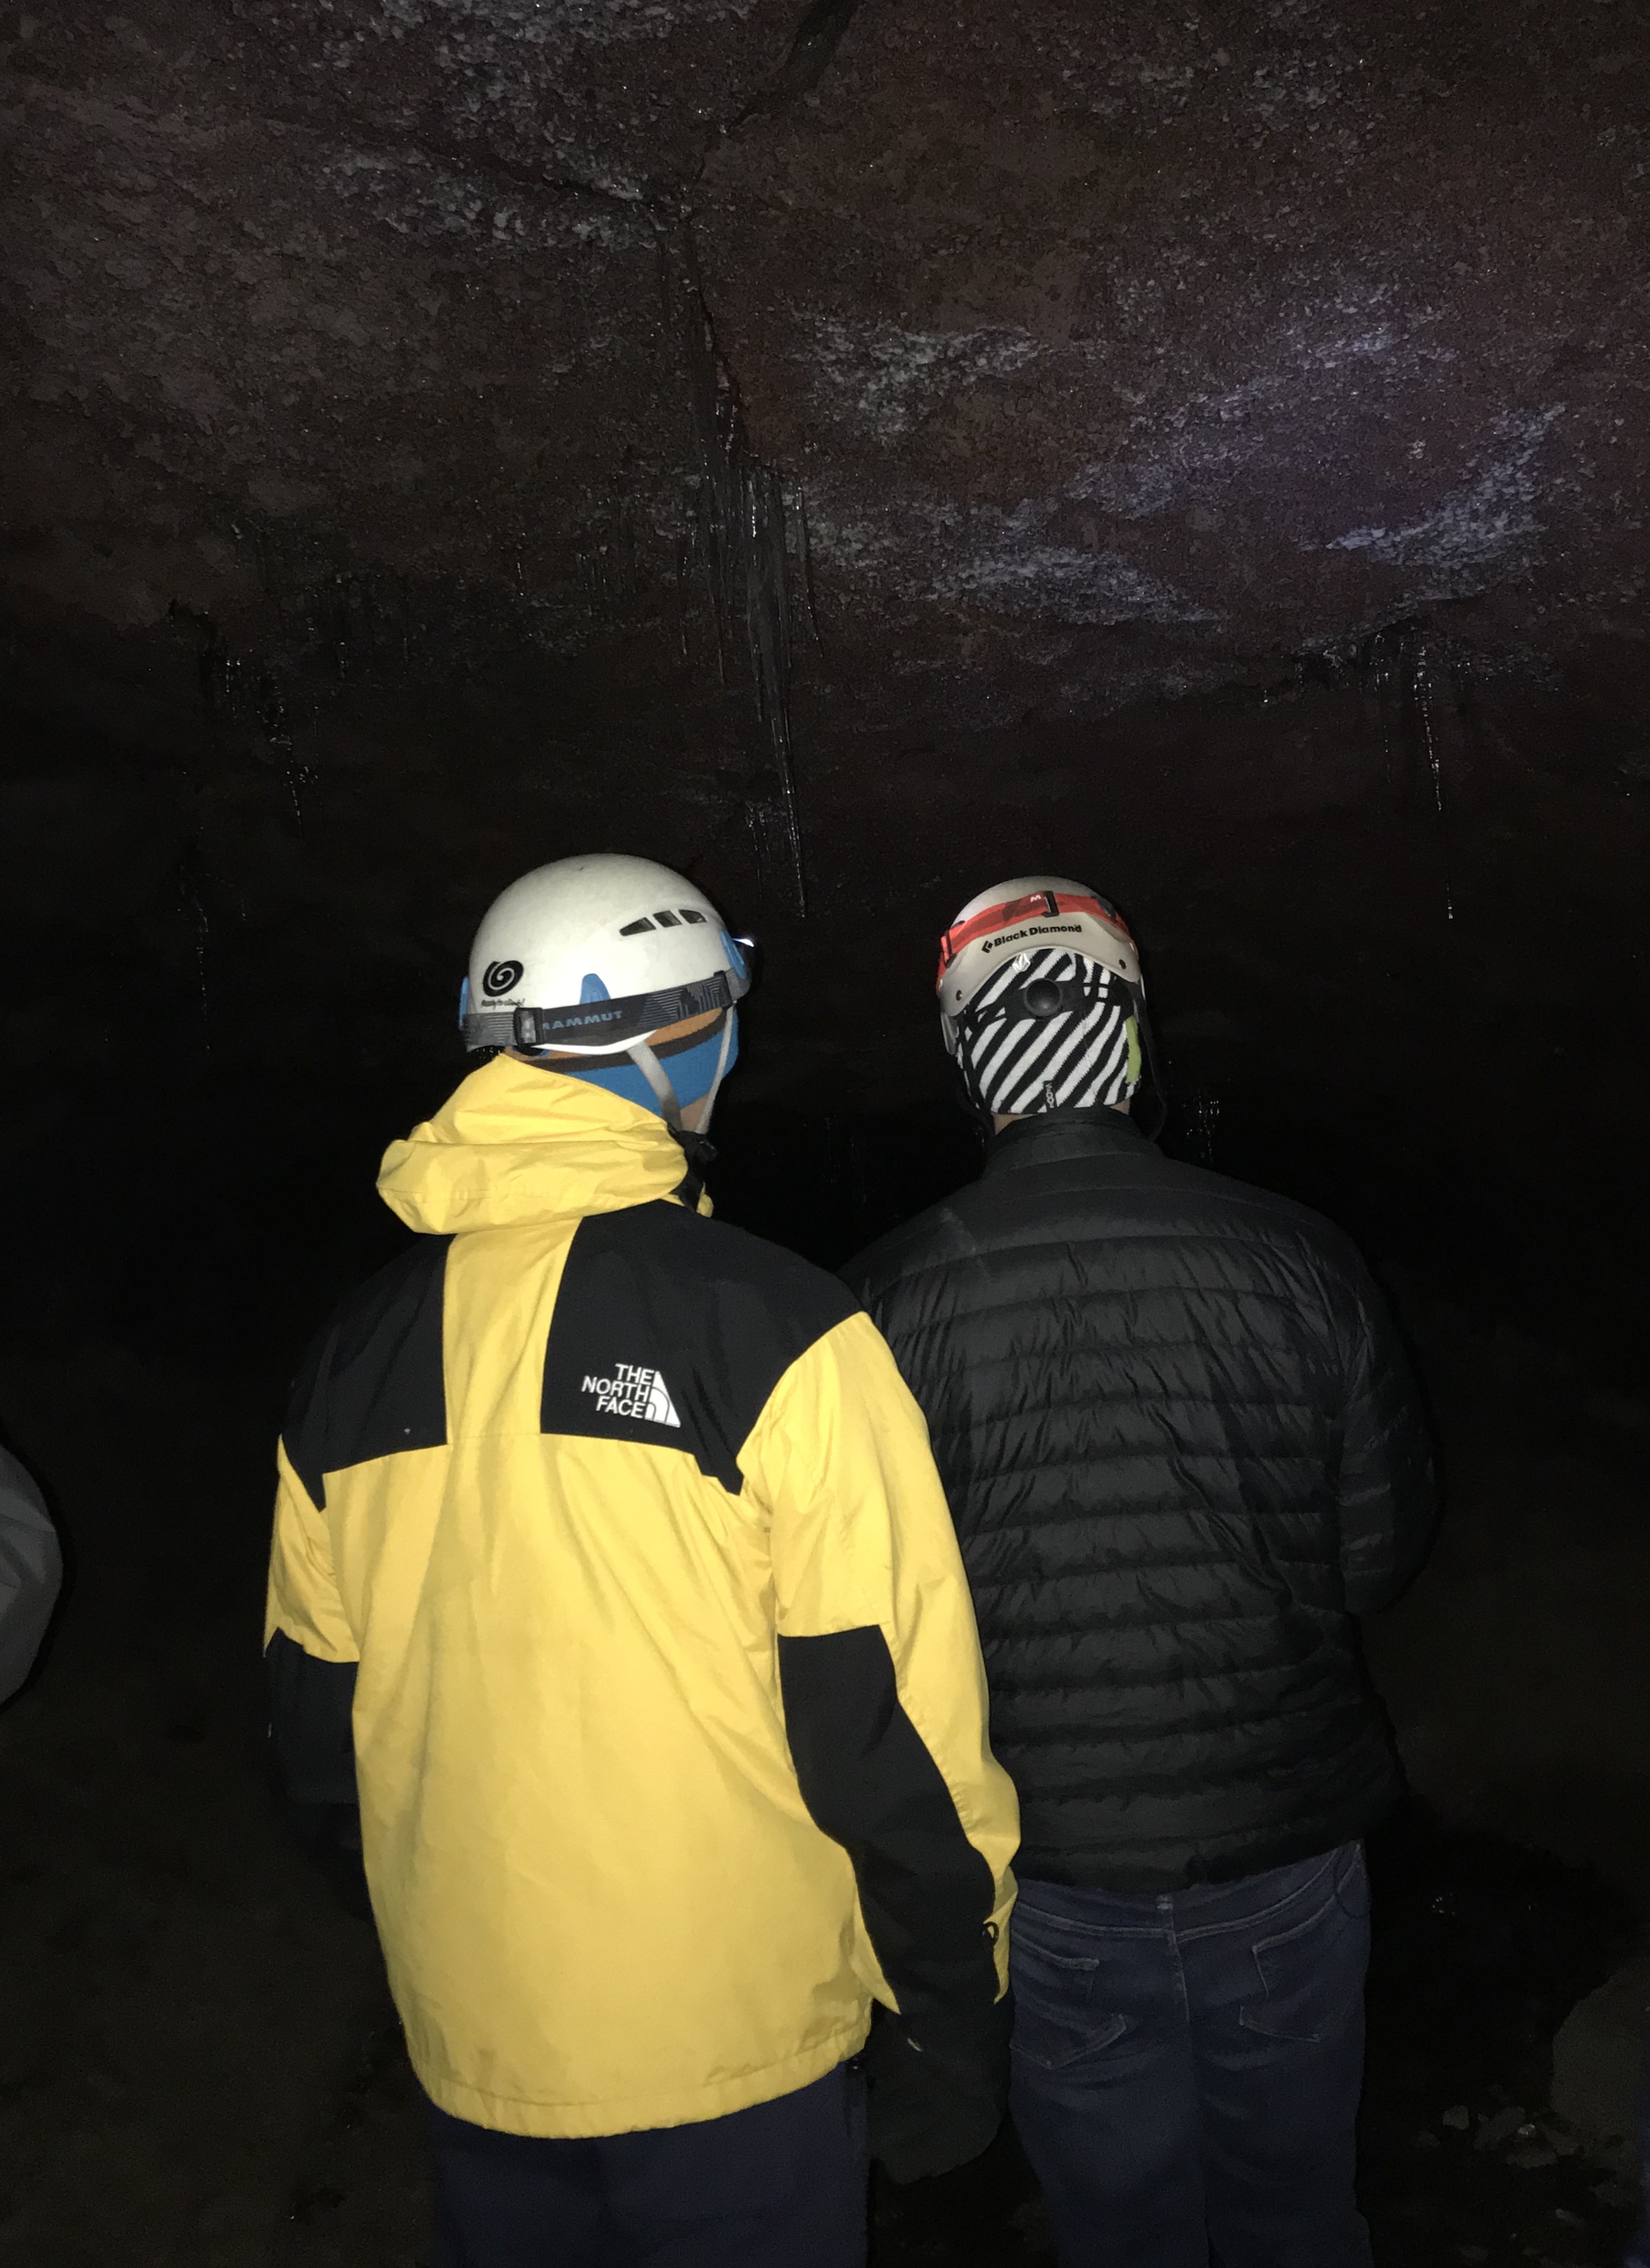 Caving in lava tubes